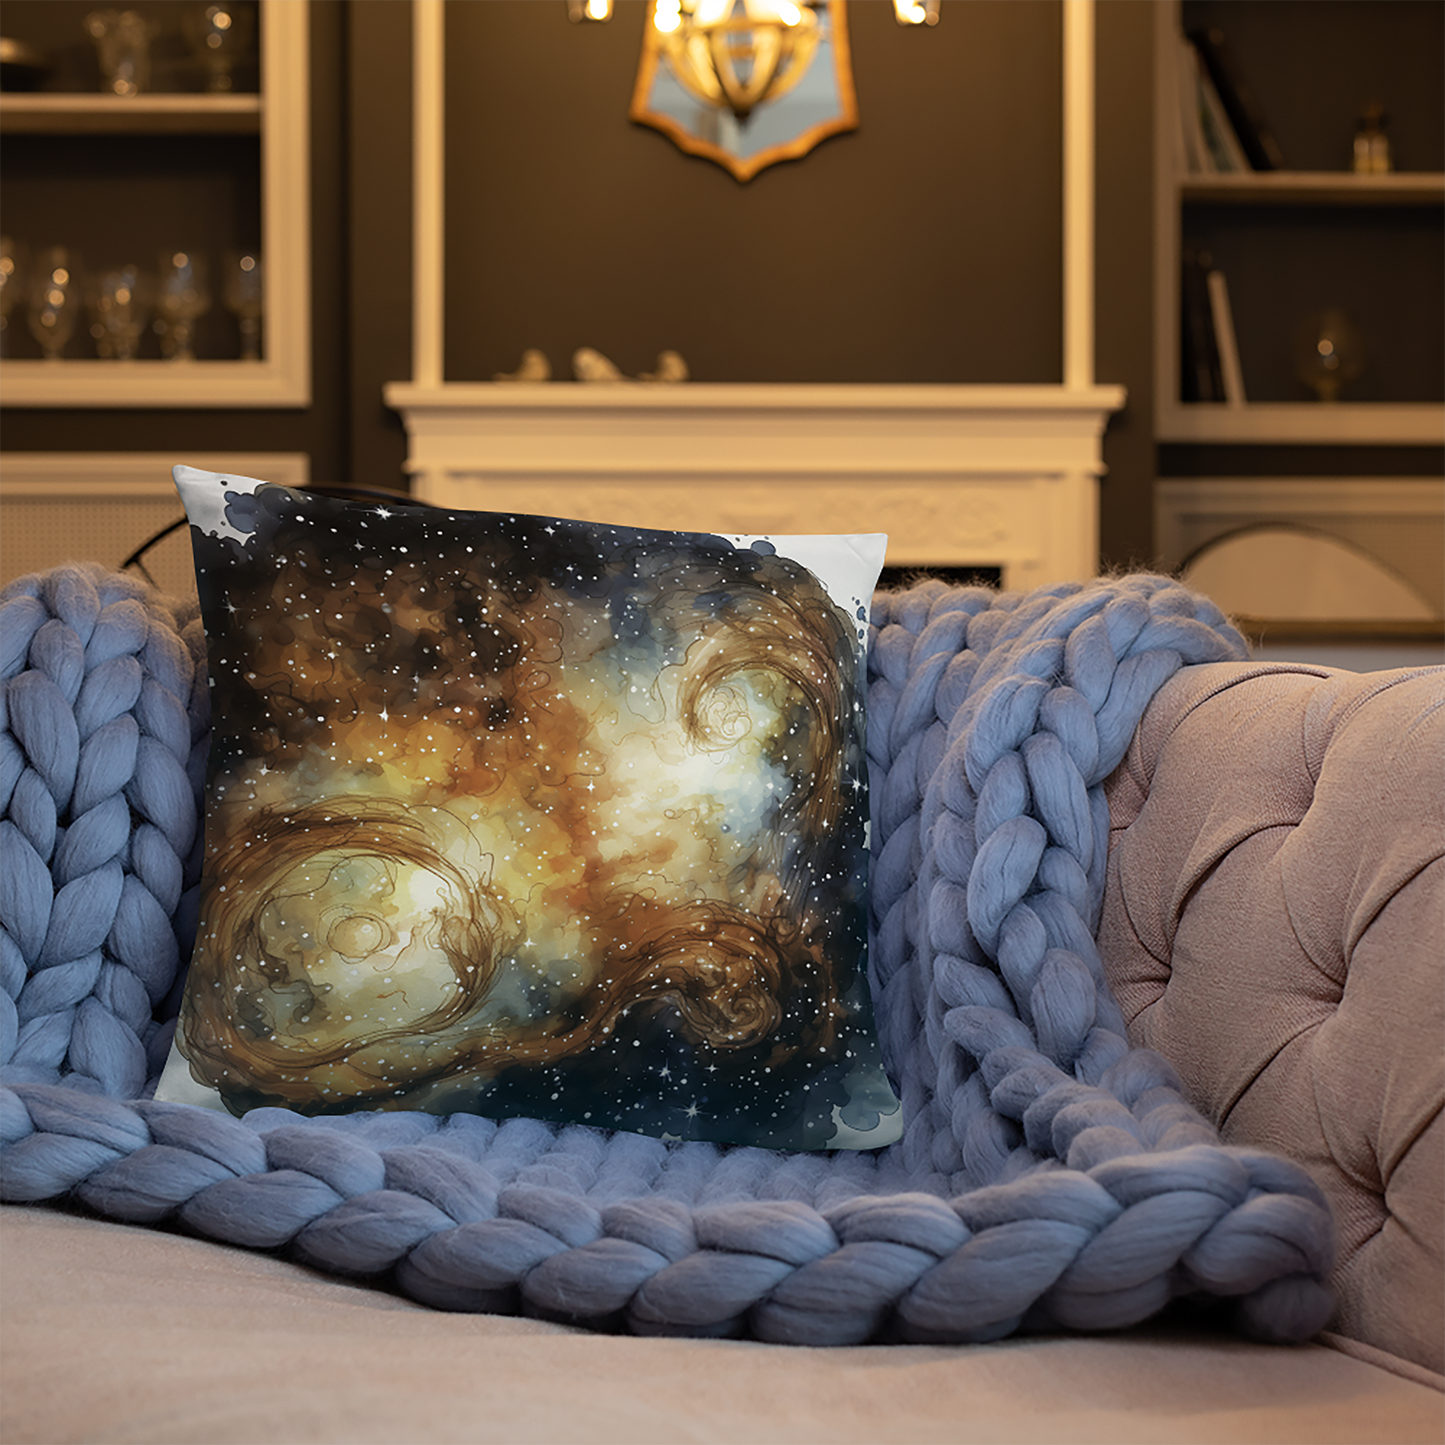 Space Throw Pillow Mysterious Orbiting Galaxy Polyester Decorative Cushion 18x18